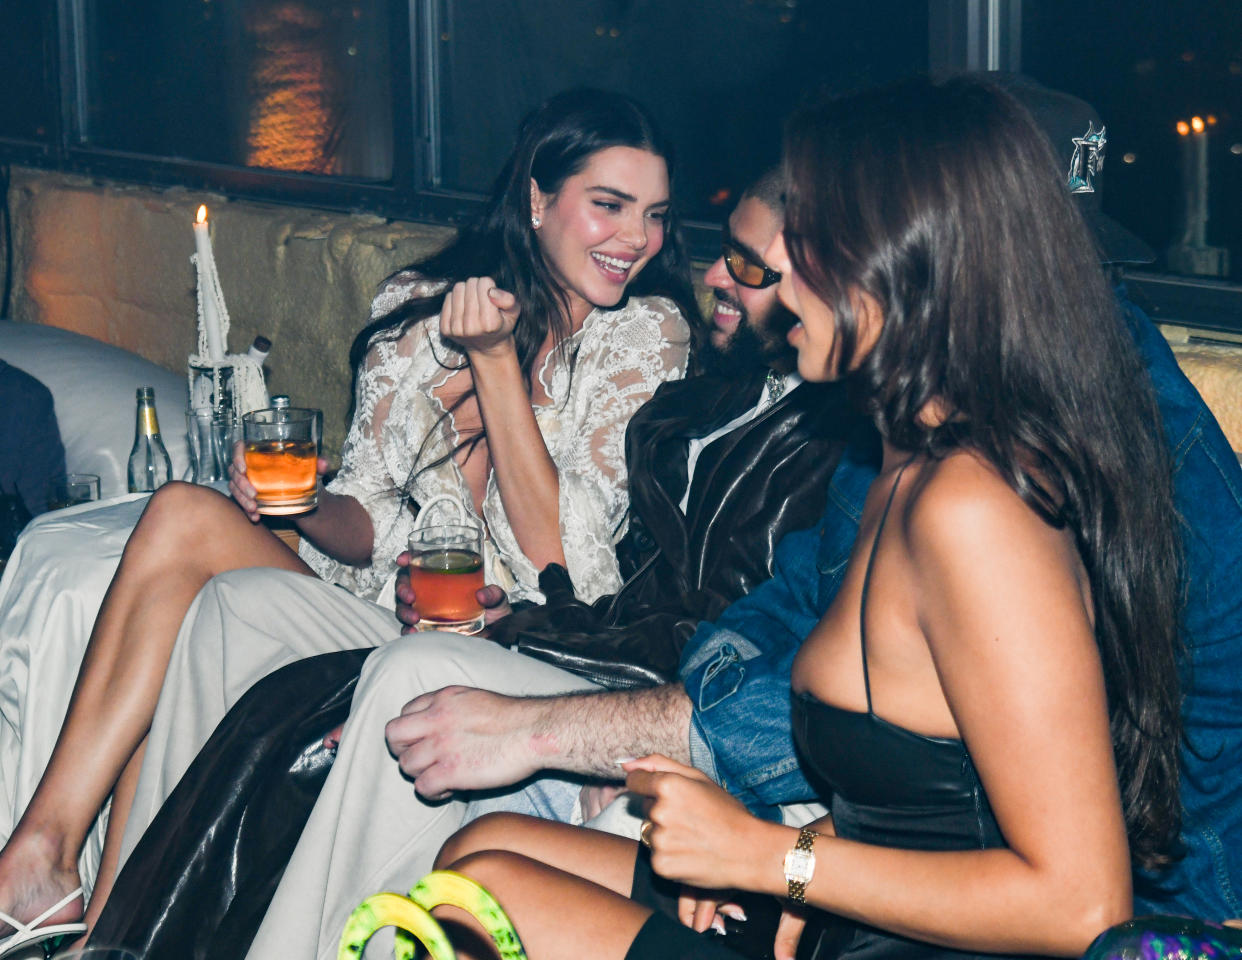 Kendall Jenner, Bad Bunny and other guests at a party.